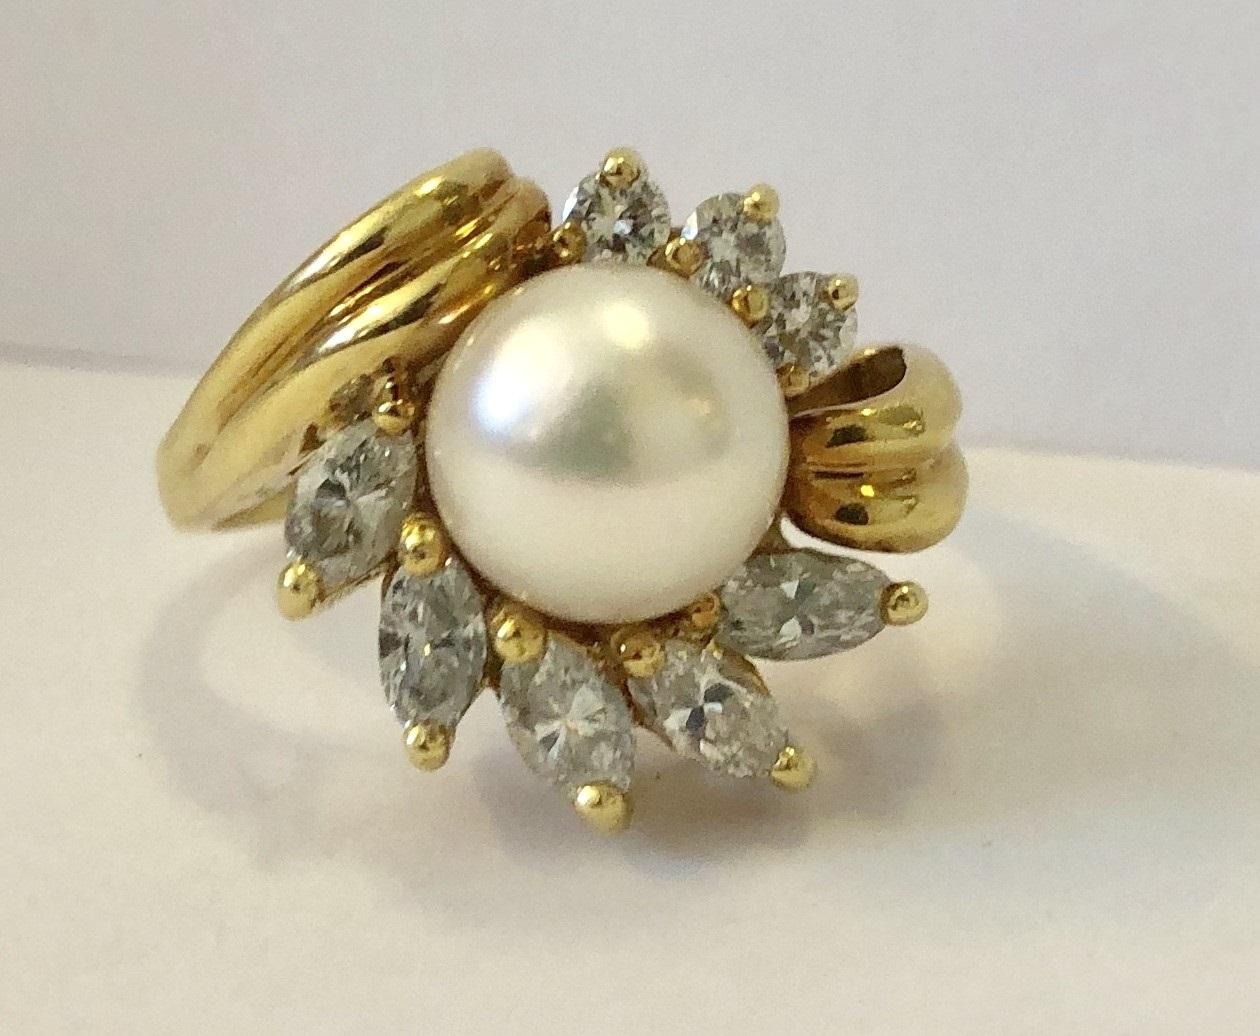 Pearl & Diamond Ring, Black, Starr & Frost
Centered by a cultured pearl measuring 8.14 mm, enhanced by marquise and full-cut diamonds, 
weighing a total of approximately 0.50 carat 
mounted in 18k gold, marked BS&F.
7.50 grams, size 5 3/4